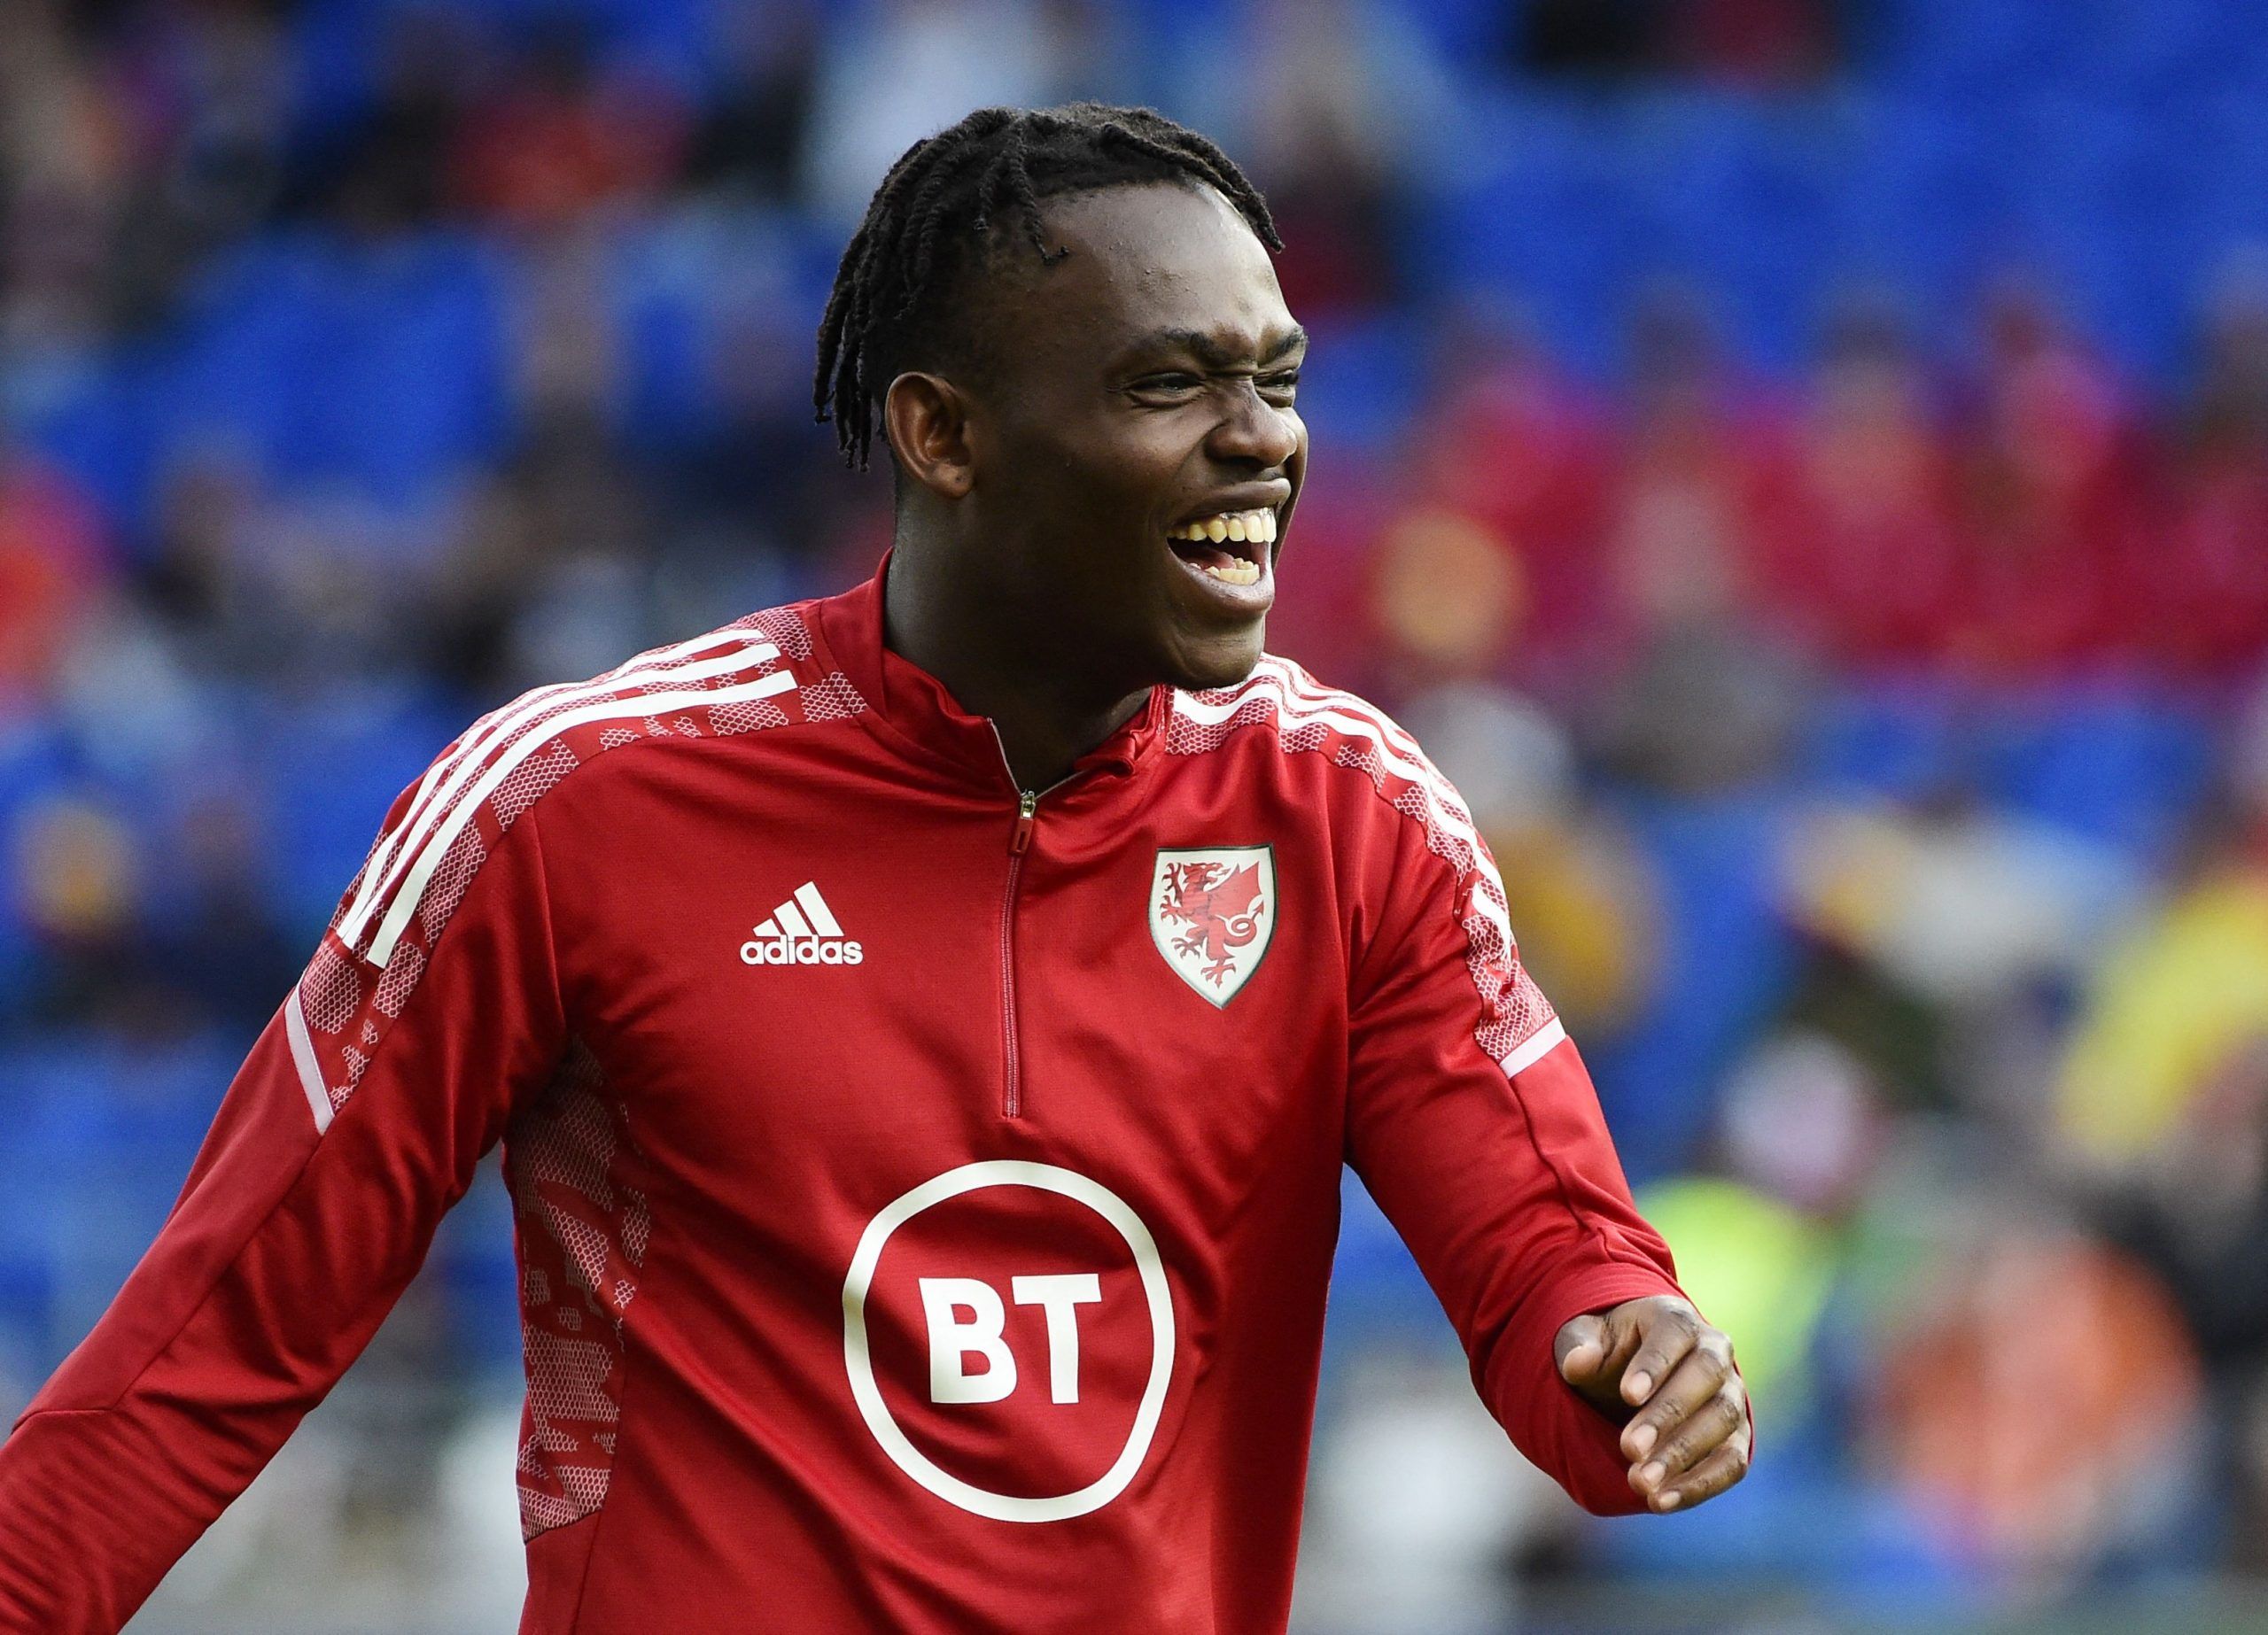 Soccer Football - UEFA Nations League - Group D - Wales v Netherlands - Cardiff City Stadium, Cardiff, Wales, Britain - June 8, 2022 Wales' Rabbi Matondo during the warm up before the match REUTERS/Rebecca Naden